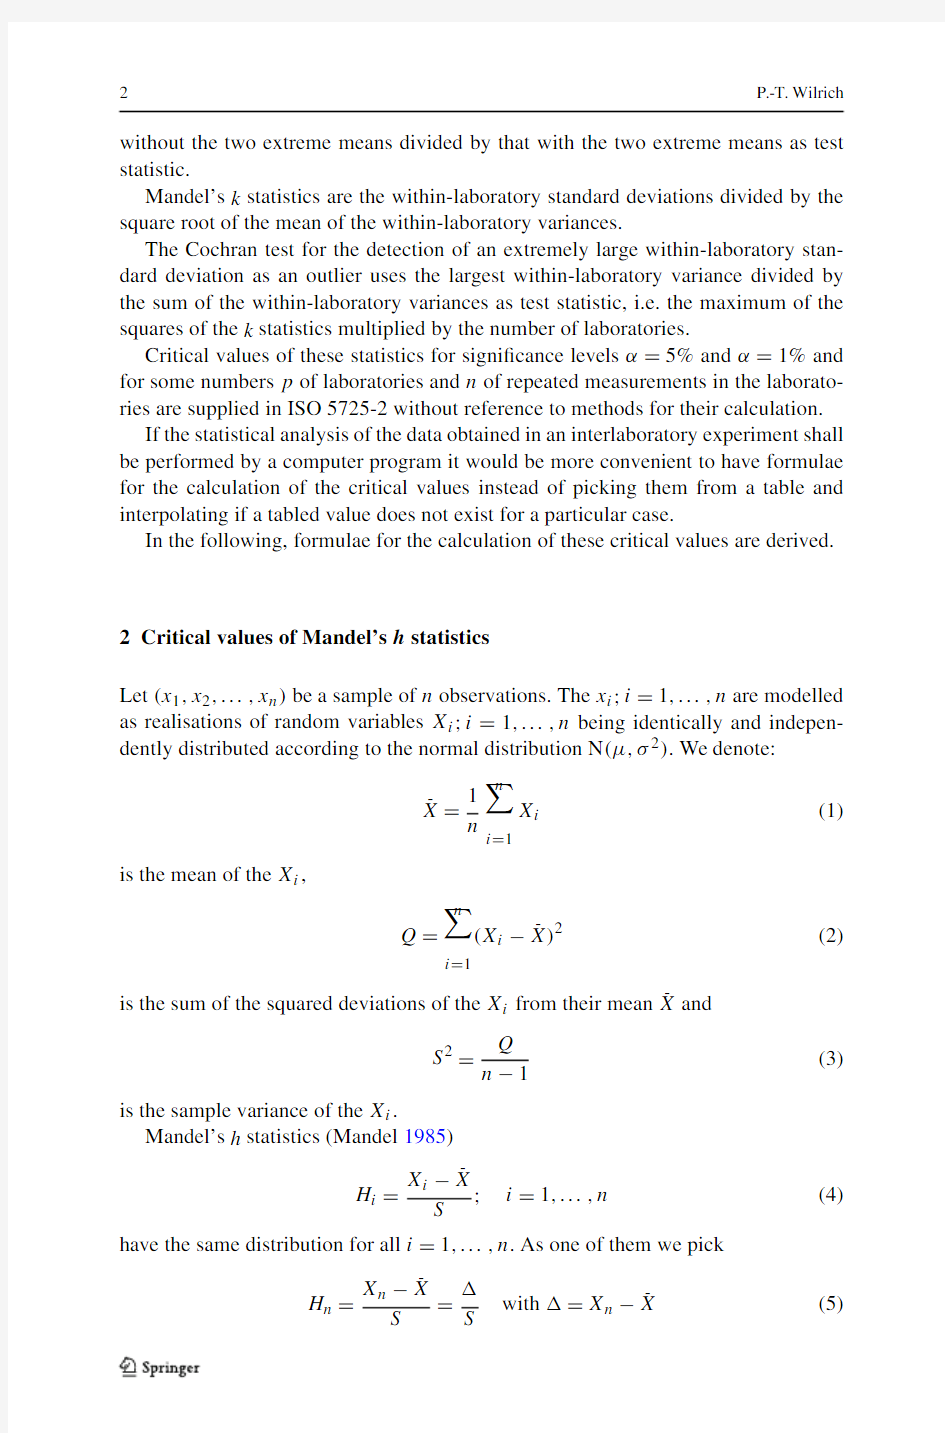 Critical values of Mandel’s h and k, the Grubbs and the Cochran test statistic